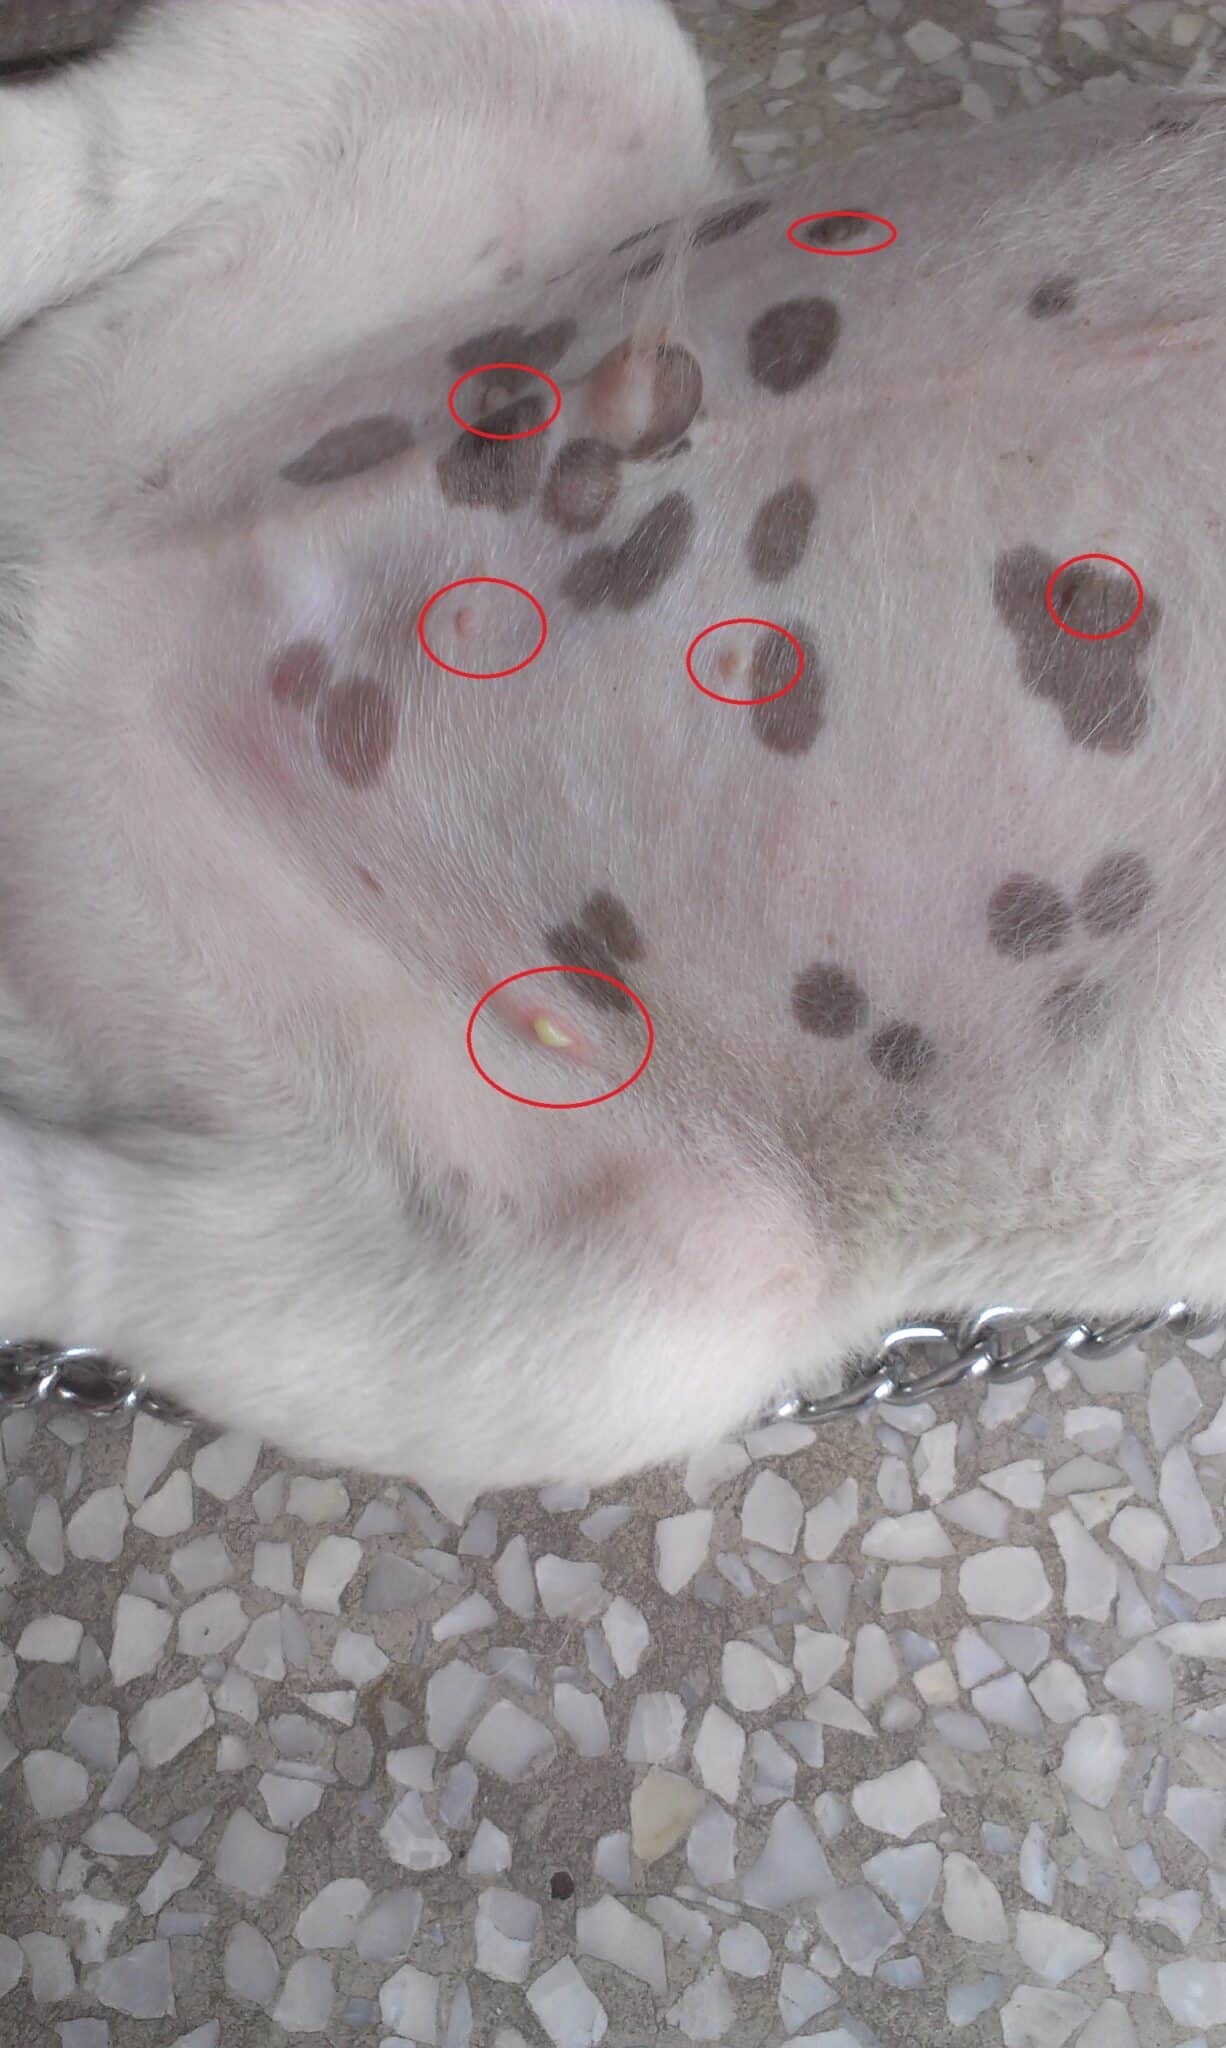 A dog's stomach with rashes pointed out on it